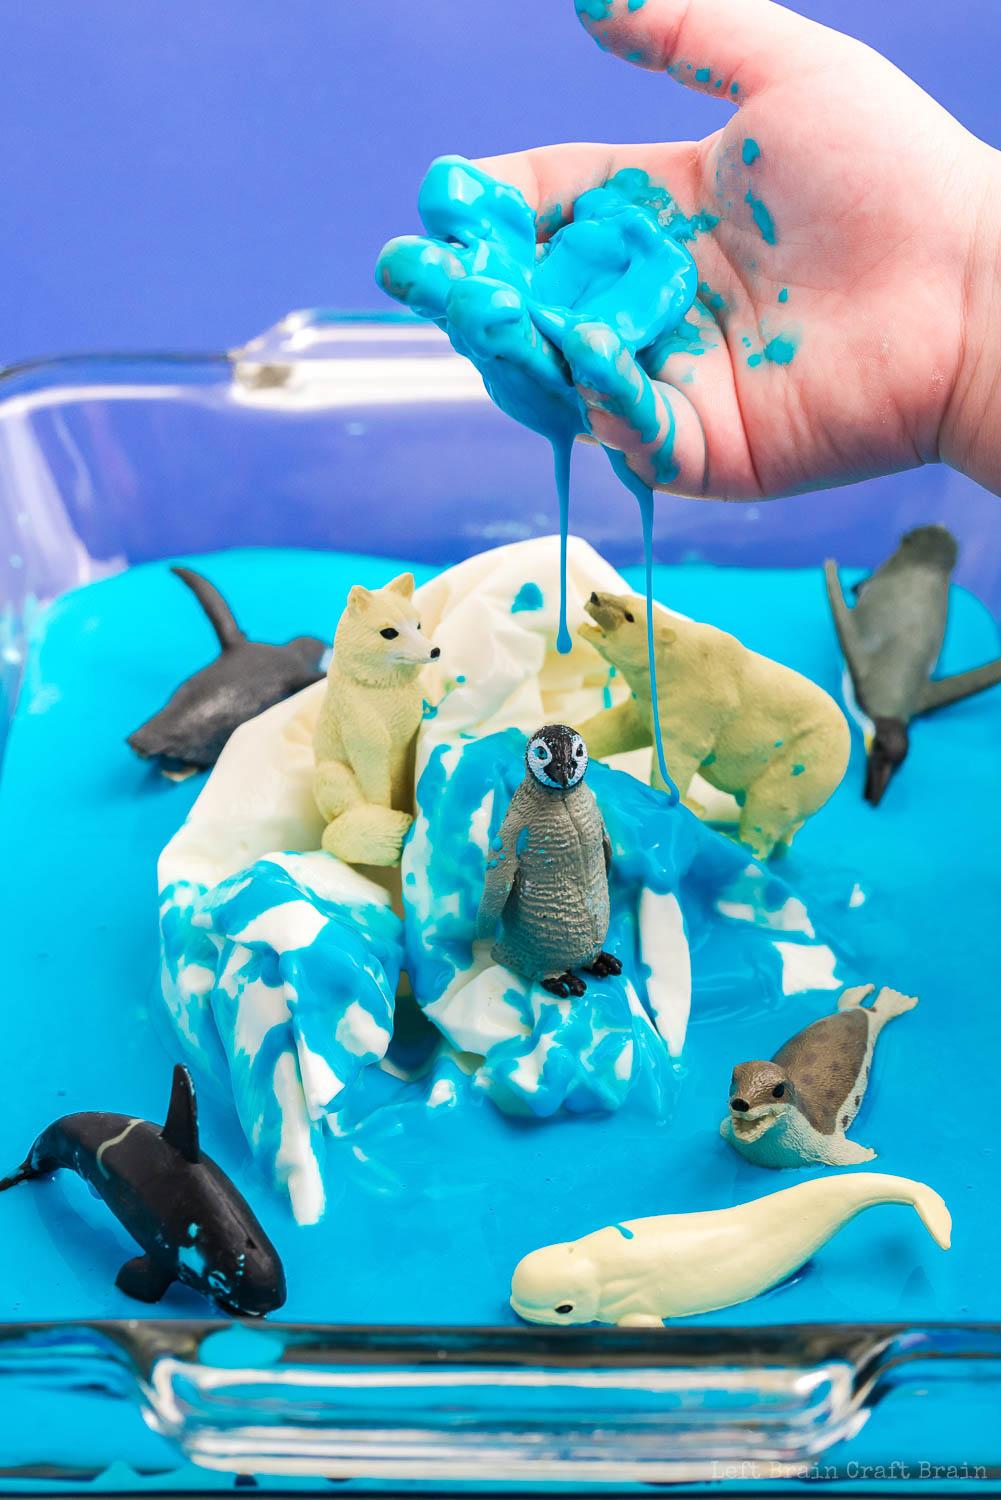 Turn a fun play session into science fun with frozen Polar Oobleck. The kids will learn about animal habitats, chemistry, and climate change.